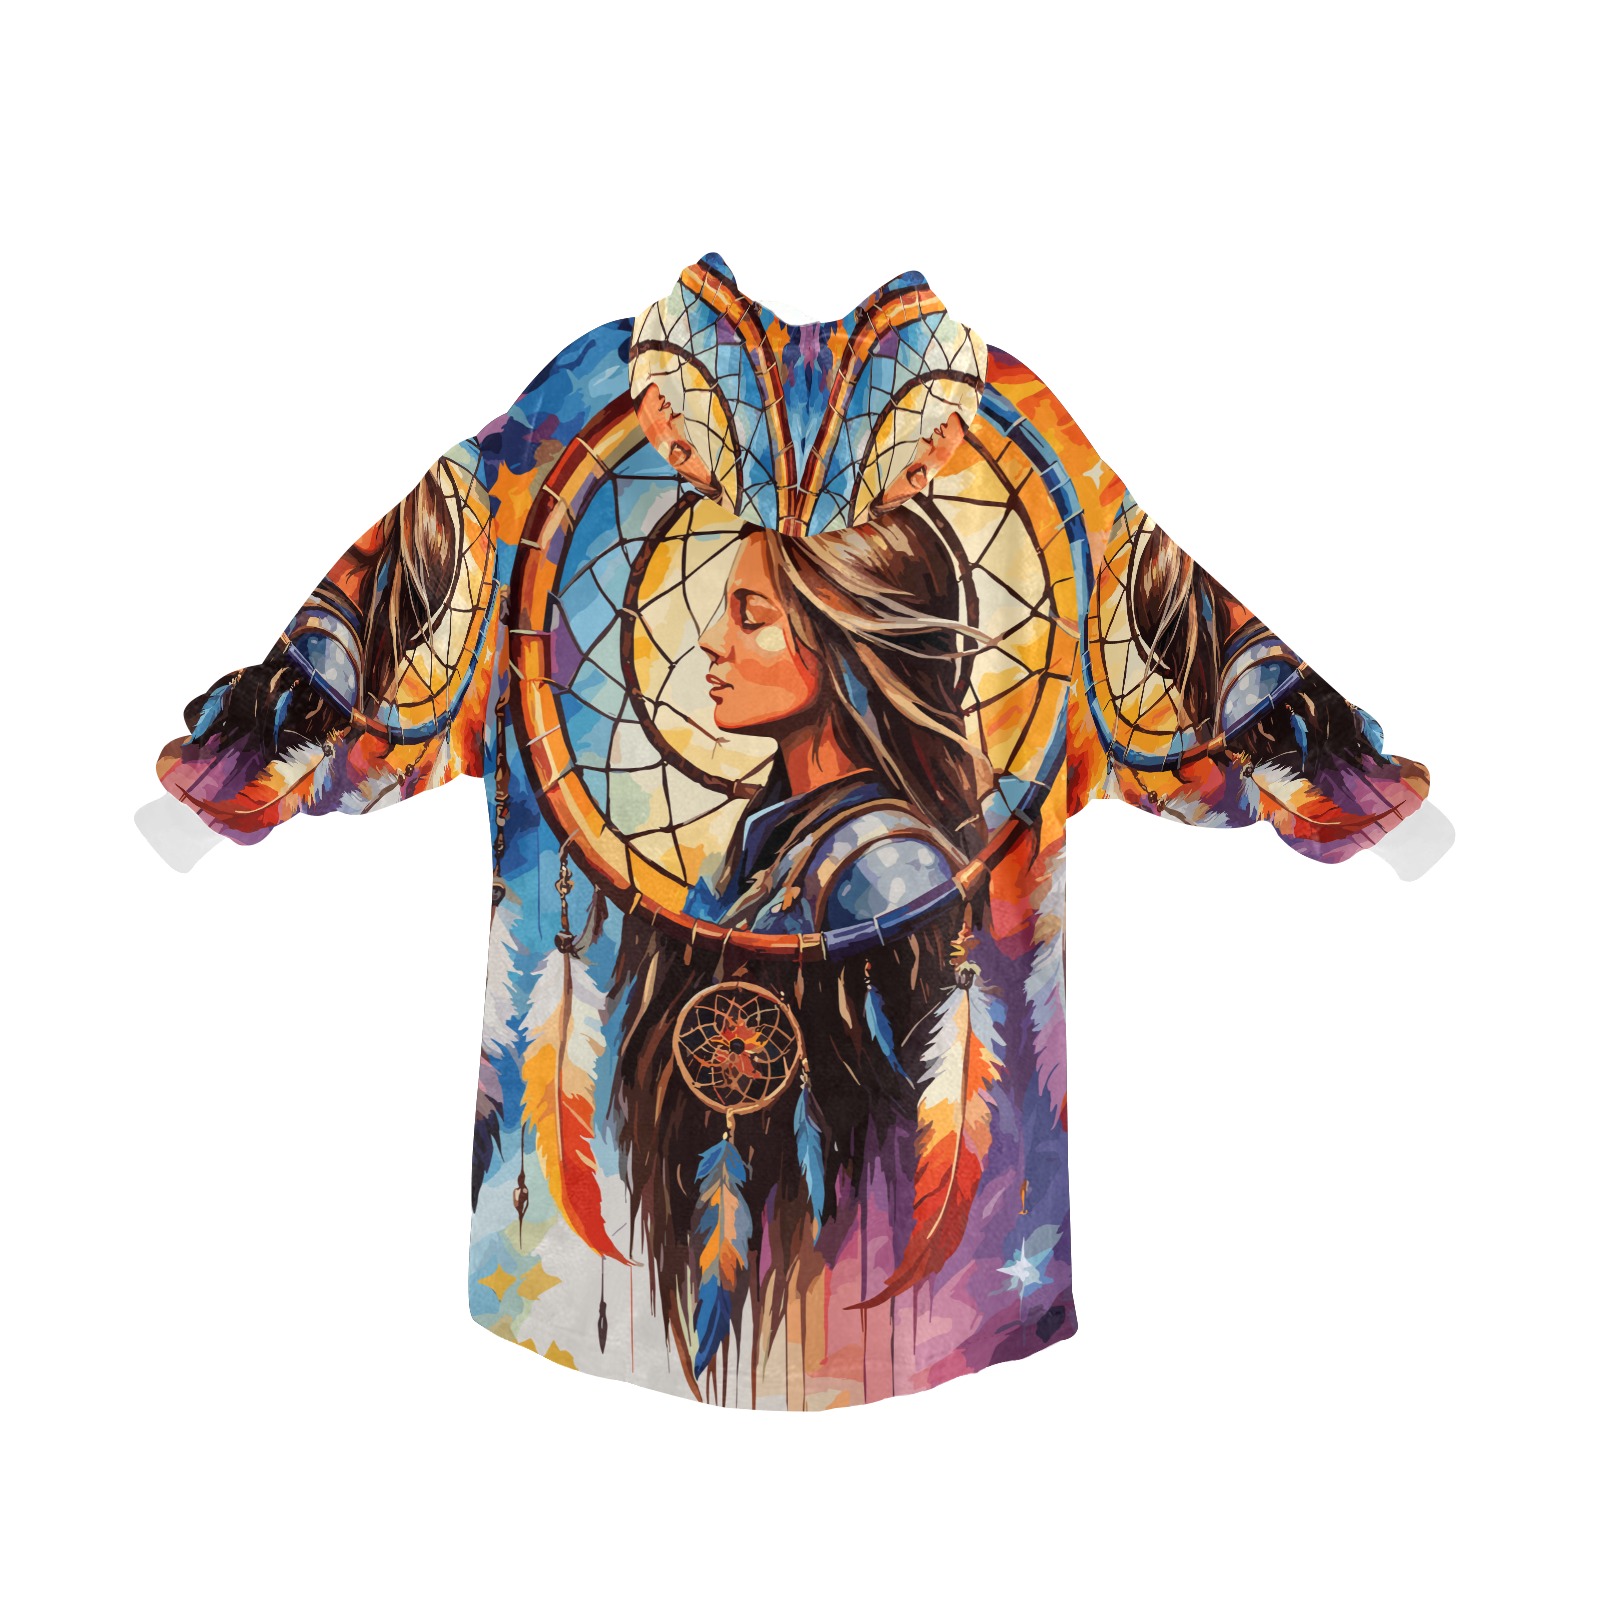 Dreaming woman inside a dreamcatcher colorful art. Blanket Hoodie for Women